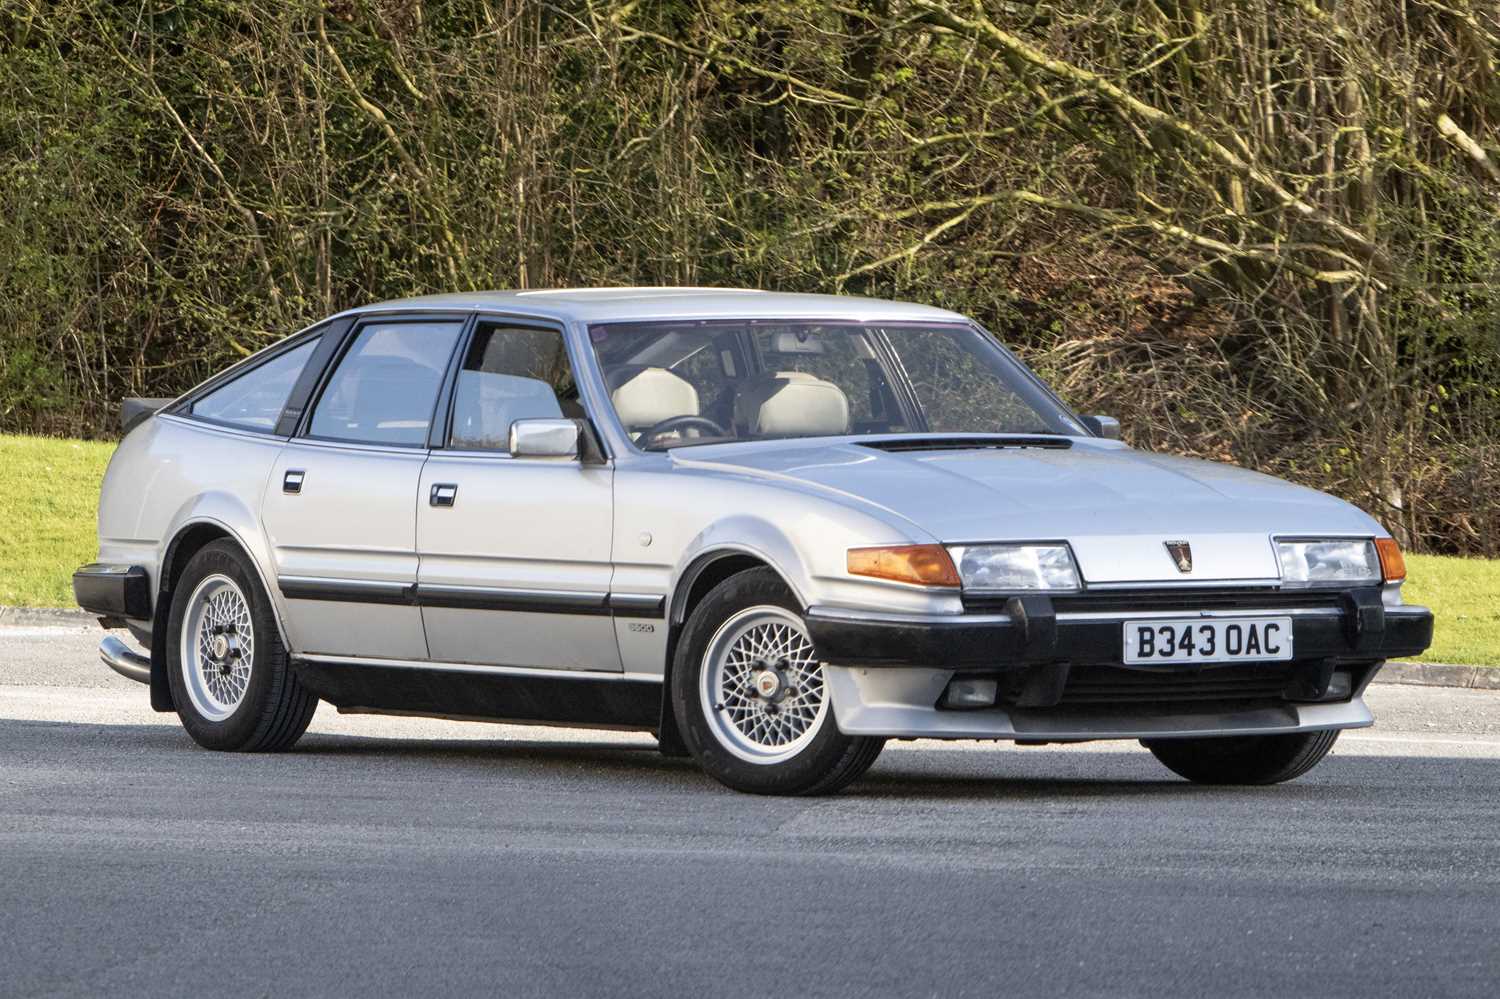 Rover SD1 at 40: the right car made by the wrong company